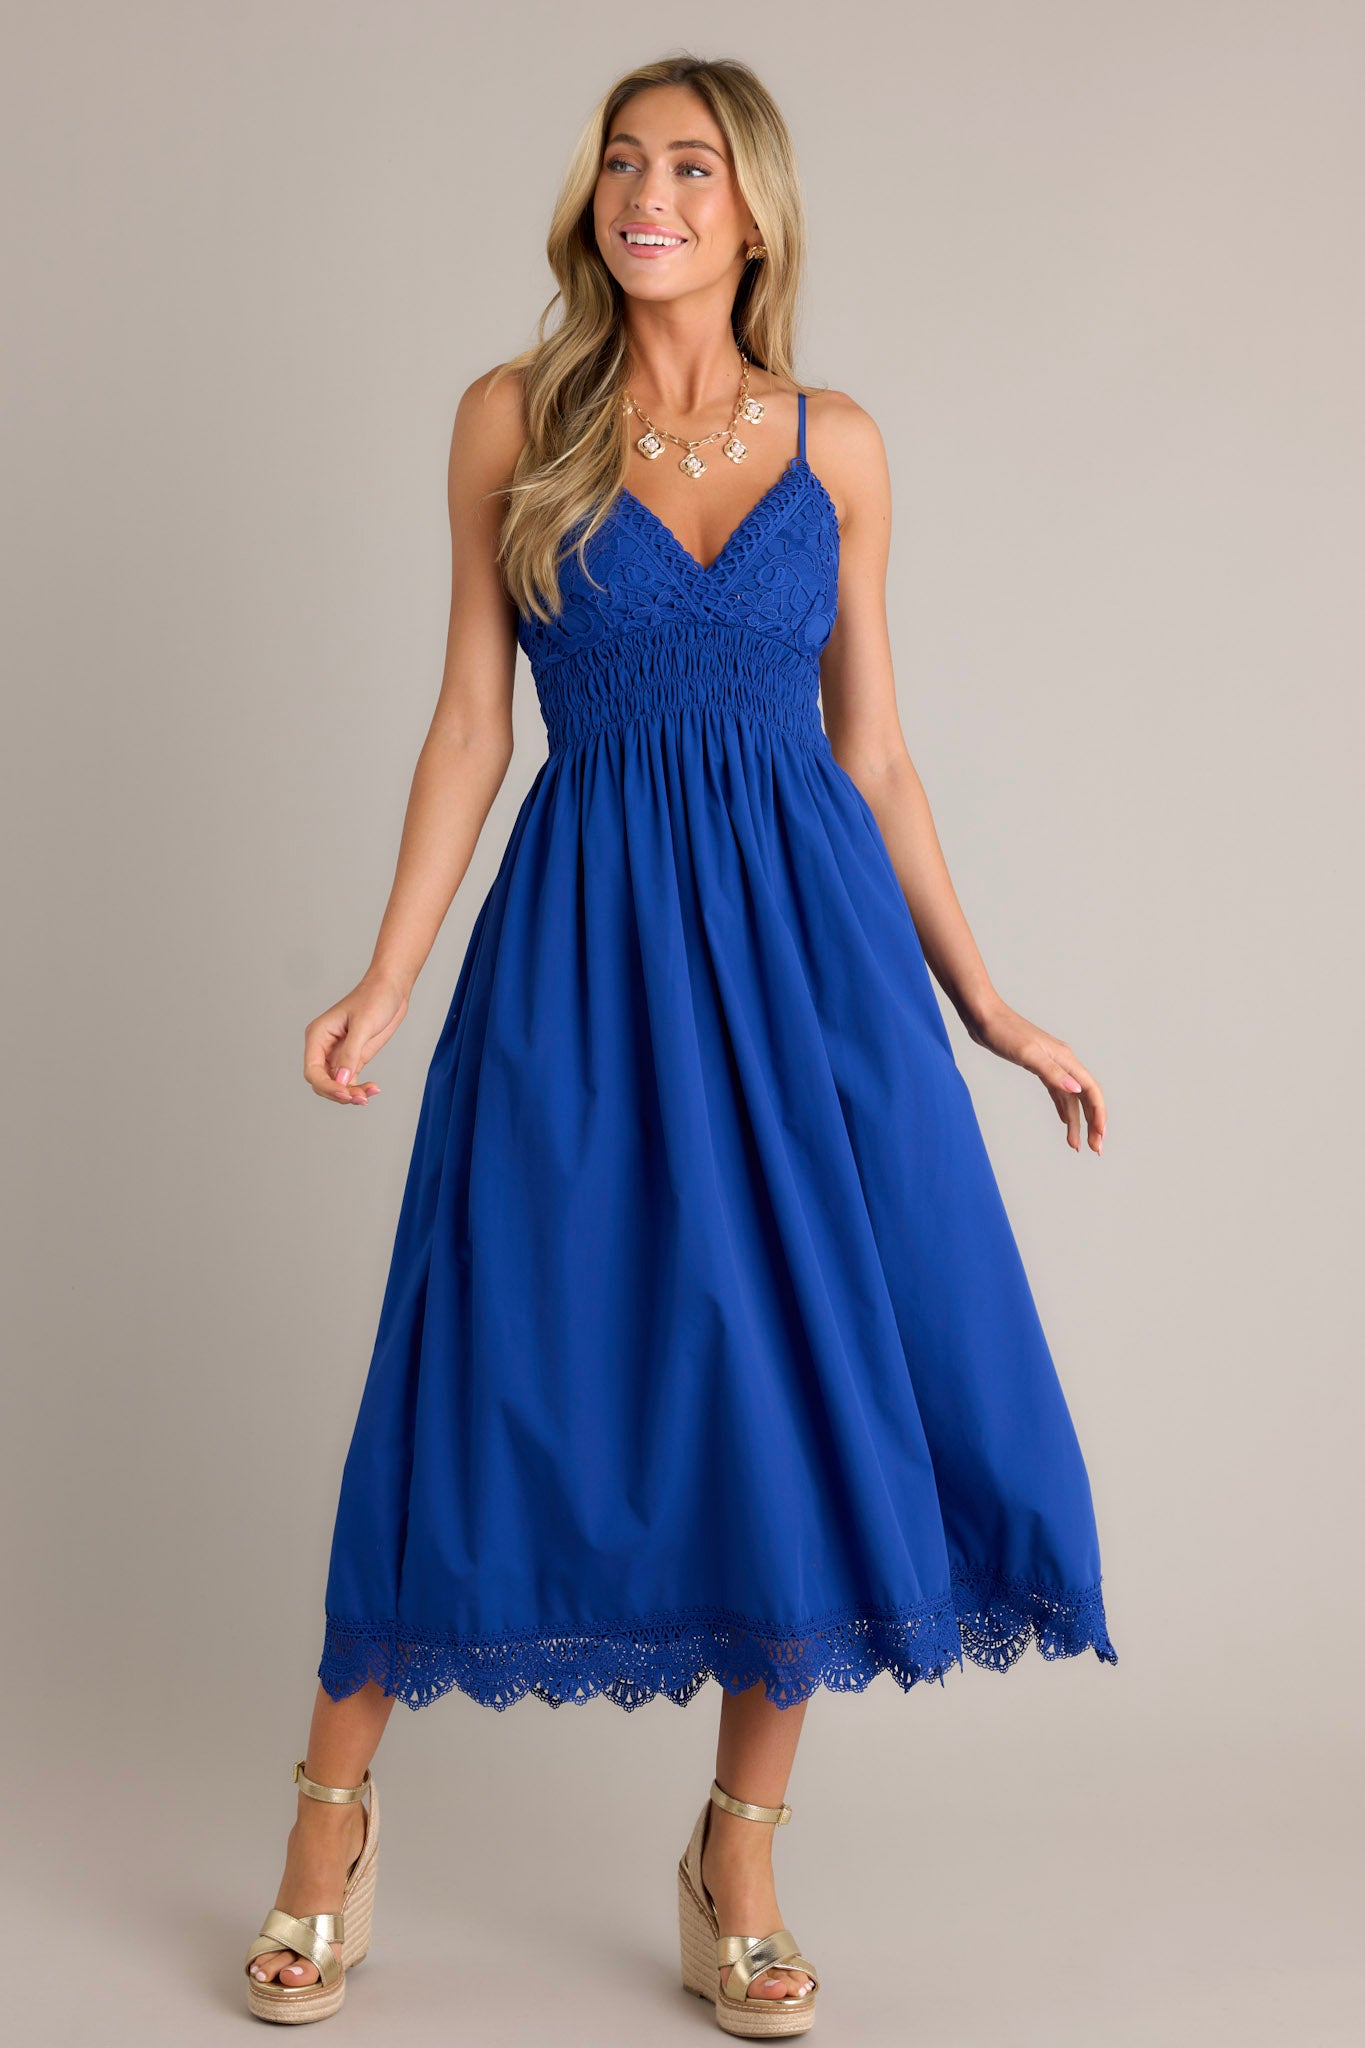 Action shot of a blue maxi dress displaying the fit and movement, highlighting the v-neckline, thin adjustable straps, lace bust, smocked waist & back, flowing silhouette, and lace hemline.